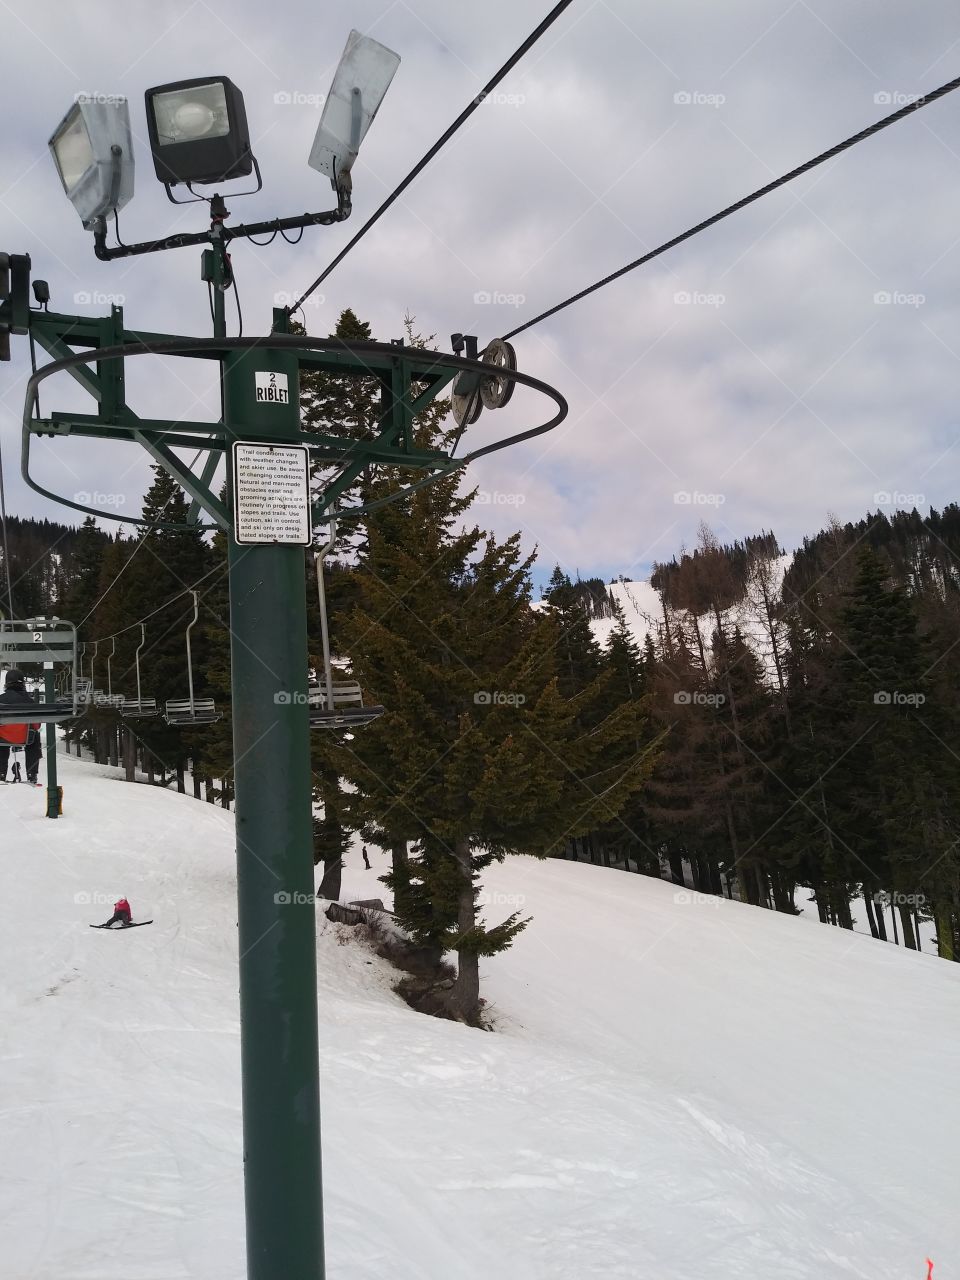 Washington ski outing, my first in 25 years. Its like riding a bike